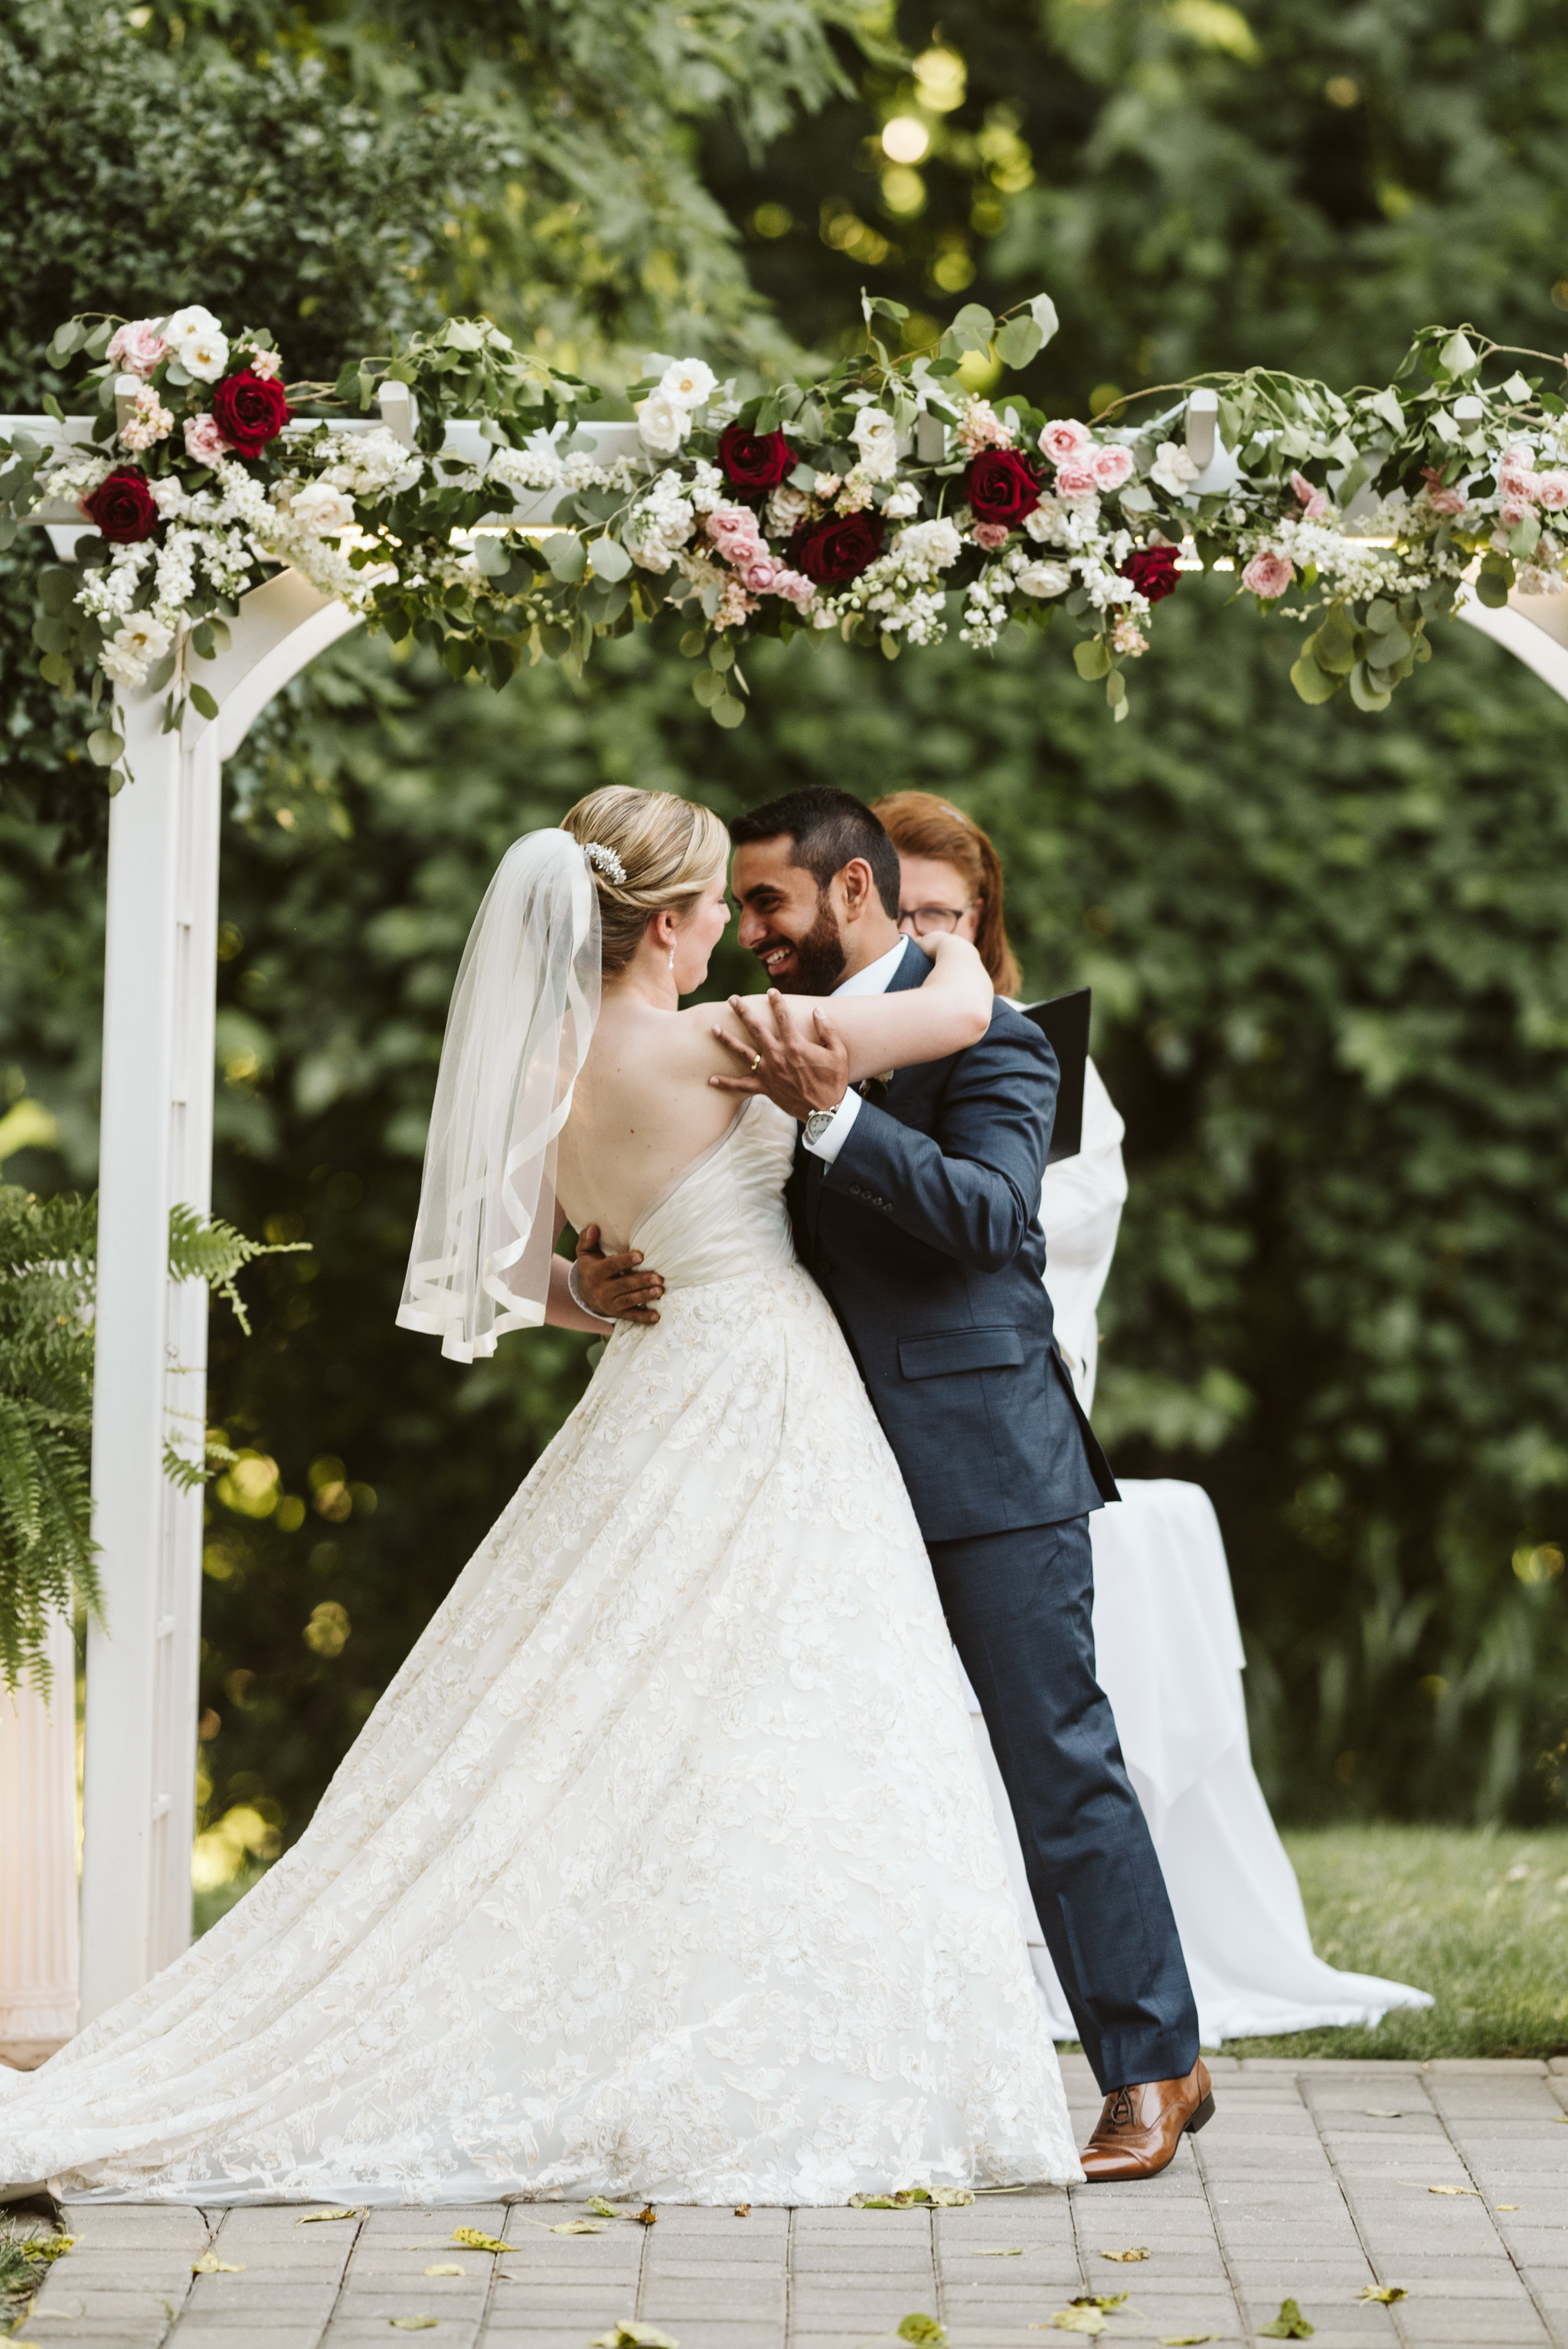  Ellicott City, Baltimore Wedding Photographer, Wayside Inn, Summer Wedding, Romantic, Traditional, Bride and Groom First Kiss Under Floral Archway, Just Married, Matthew Christopher Bridal 